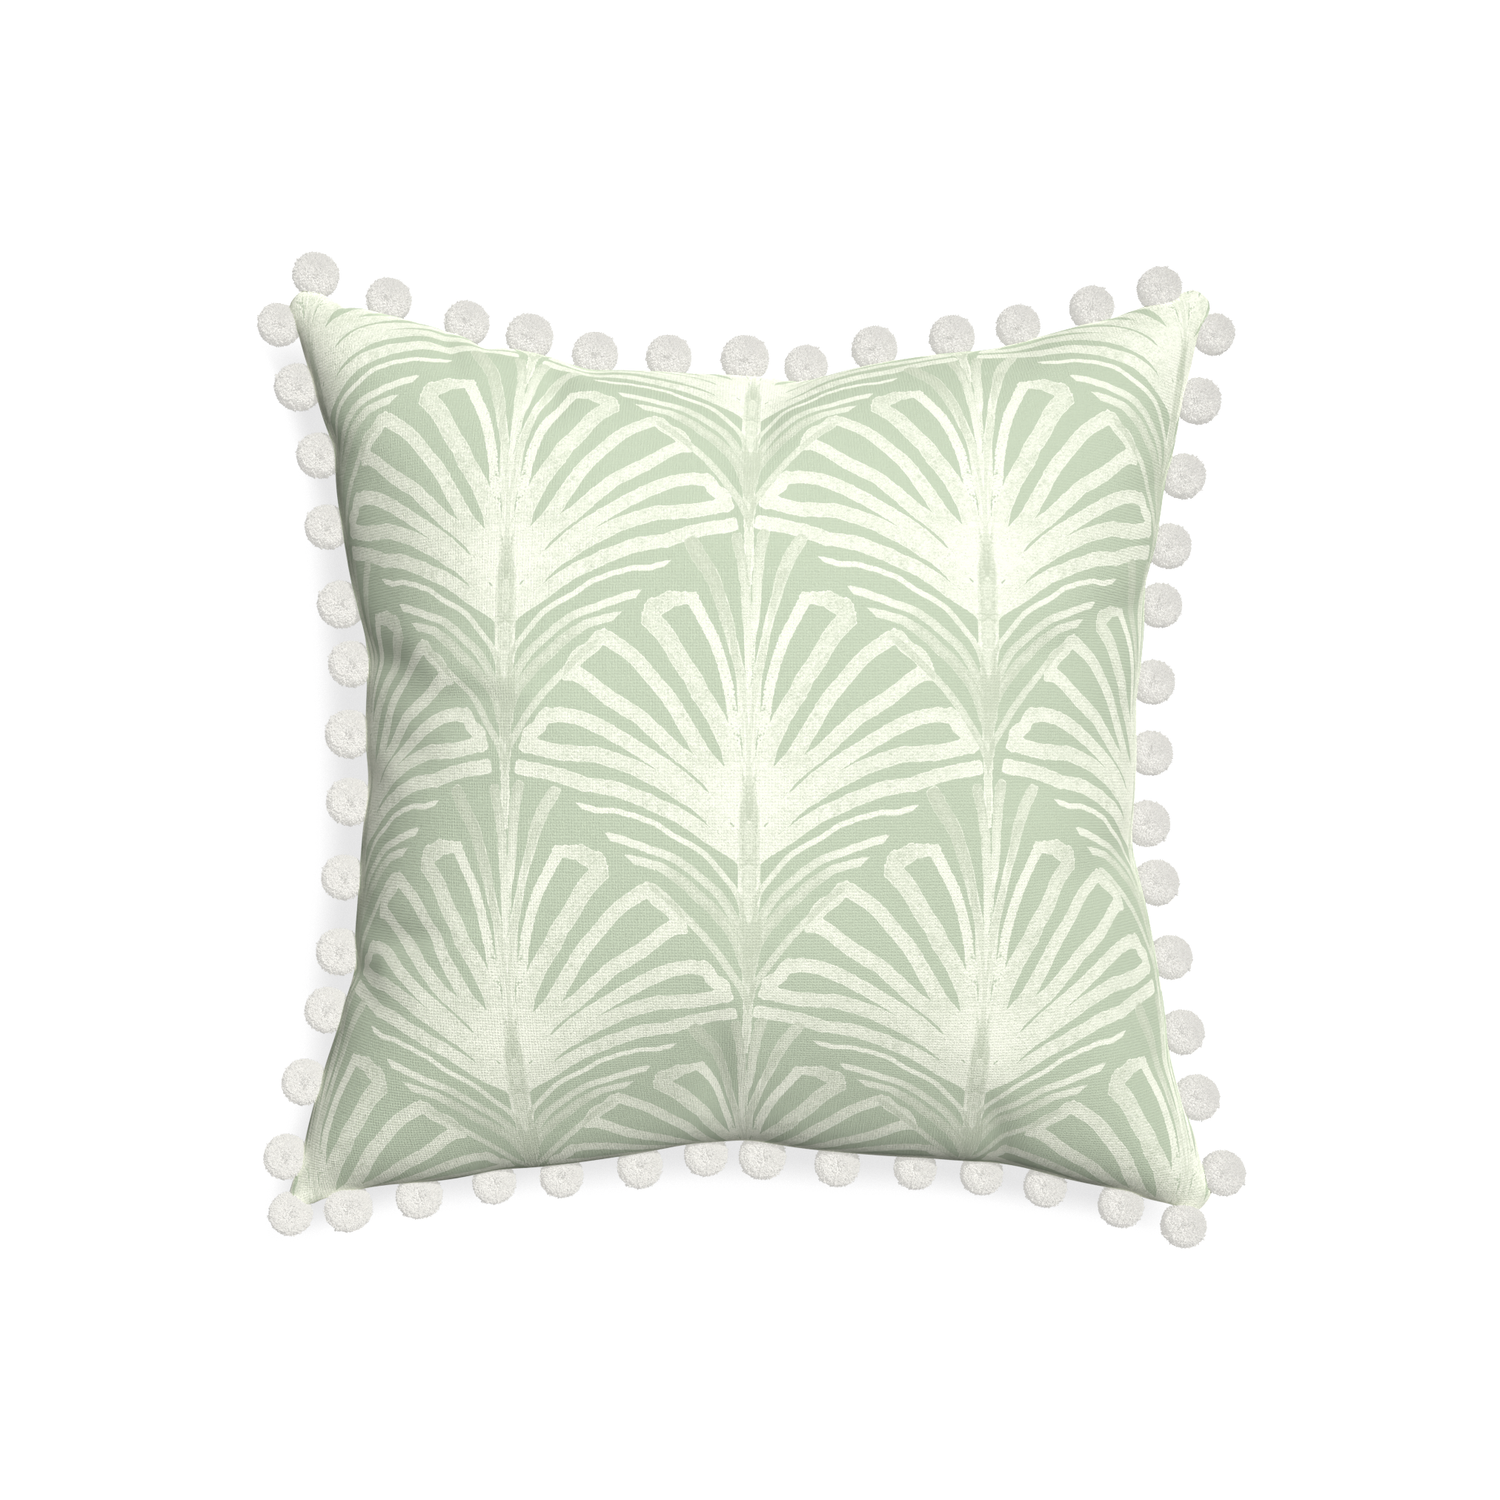 20-square suzy sage custom sage green palmpillow with snow pom pom on white background